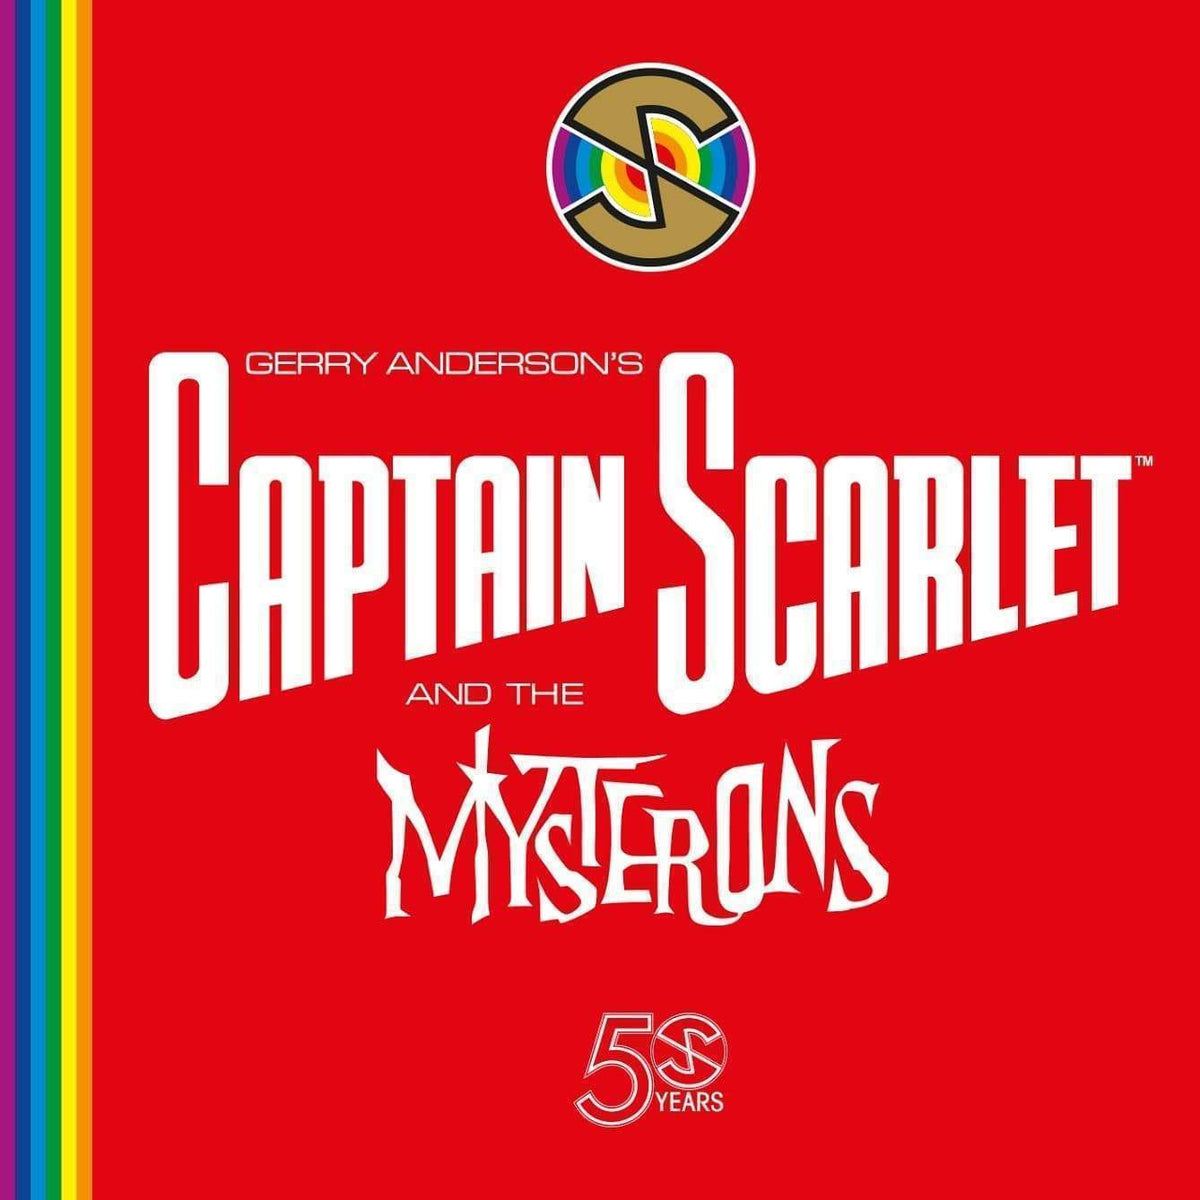 Captain Scarlet - Spectrum File 2 [DOWNLOAD] - The Gerry Anderson Store